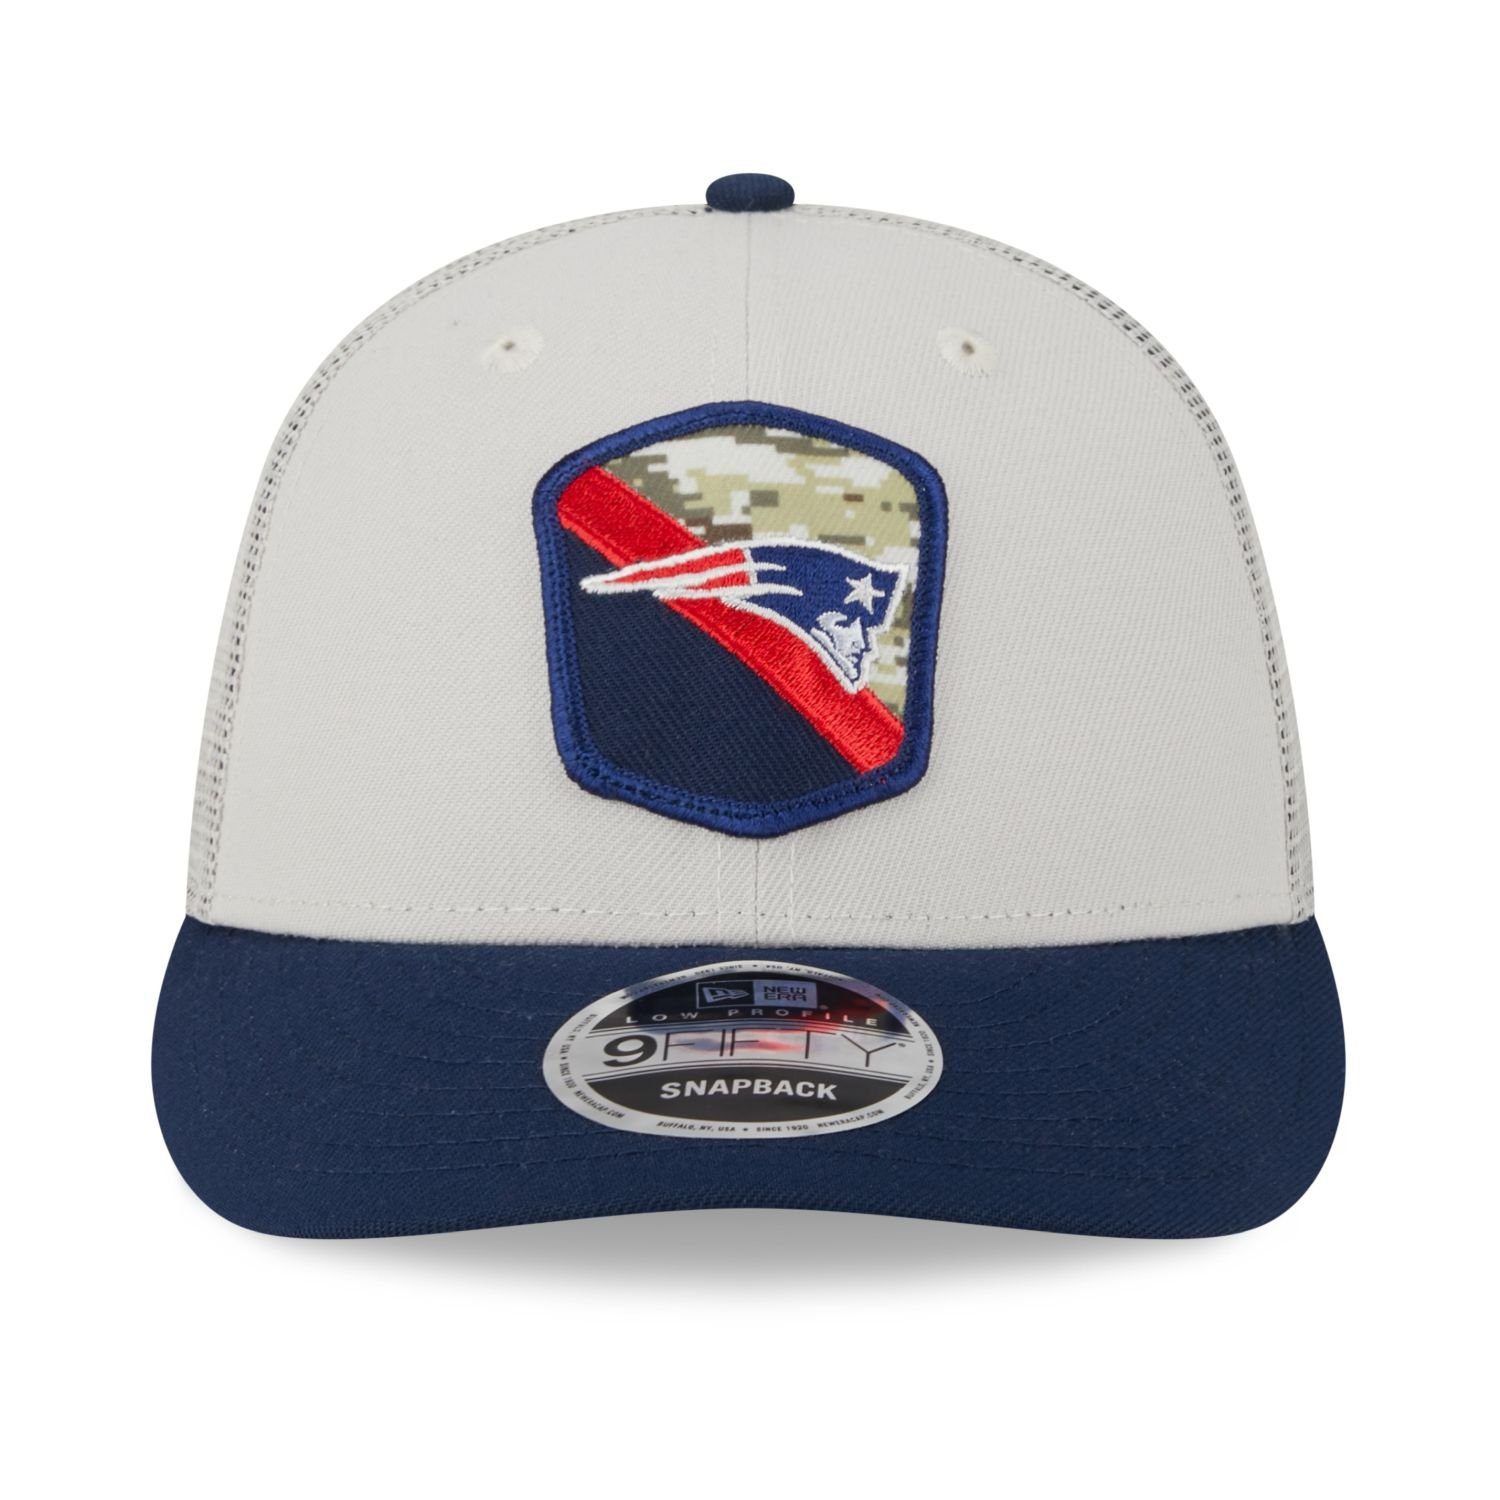 Profile Low Snapback Era Snap NFL 9Fifty Service New New Patriots England Salute to Cap